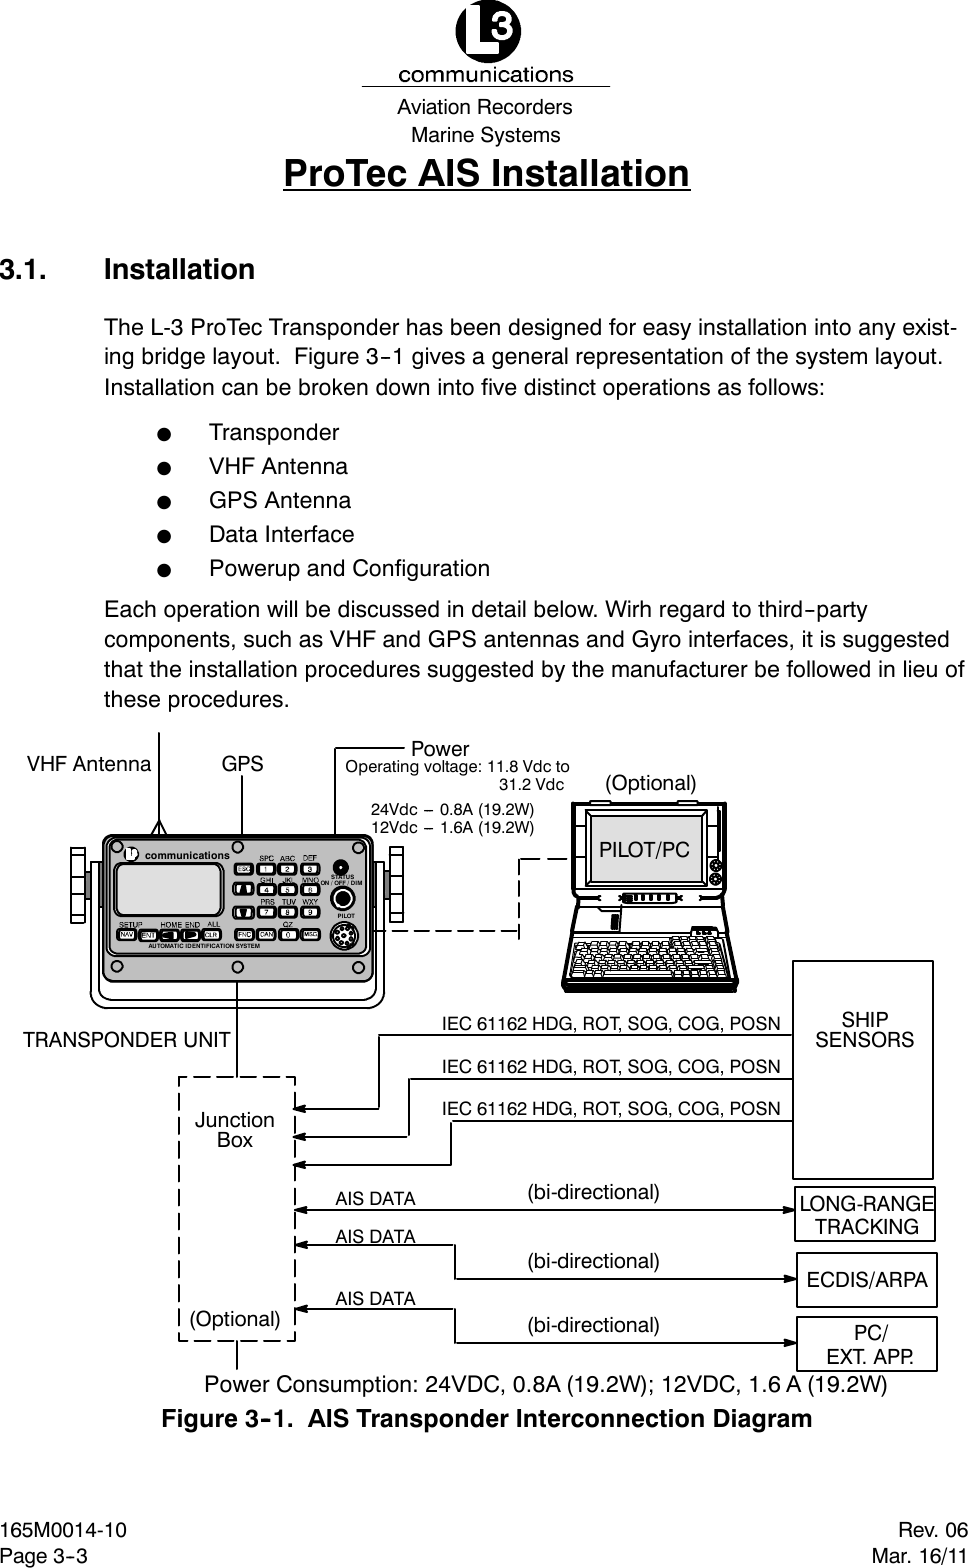 Marine SystemsAviation RecordersRev. 06Mar. 16/11165M0014-10Page 3--3ProTec AIS Installation3.1. InstallationThe L-3 ProTec Transponder has been designed for easy installation into any exist-ing bridge layout. Figure 3--1 gives a general representation of the system layout.Installation can be broken down into five distinct operations as follows:FTransponderFVHF AntennaFGPS AntennaFData InterfaceFPowerup and ConfigurationEach operation will be discussed in detail below. Wirh regard to third--partycomponents, such as VHF and GPS antennas and Gyro interfaces, it is suggestedthat the installation procedures suggested by the manufacturer be followed in lieu ofthese procedures.JunctionBoxIEC 61162 HDG, ROT, SOG, COG, POSNTRANSPONDER UNIT SHIPSENSORS(Optional)LONG-RANGEECDIS/ARPAPC/AIS DATAAIS DATAAIS DATAVHF Antenna GPSPILOT/PC(Optional)communicationsPILOTAUTOMATIC IDENTIFICATION SYSTEMSTATUSON/OFF/DIM(bi-directional)(bi-directional)(bi-directional)IEC 61162 HDG, ROT, SOG, COG, POSNIEC 61162 HDG, ROT, SOG, COG, POSNTRACKINGEXT. APP.Power Consumption: 24VDC, 0.8A (19.2W); 12VDC, 1.6 A (19.2W)24Vdc --- 0.8A (19.2W)Power12Vdc --- 1.6A (19.2W)Operating voltage: 11.8 Vdc to31.2 VdcFigure 3--1. AIS Transponder Interconnection Diagram